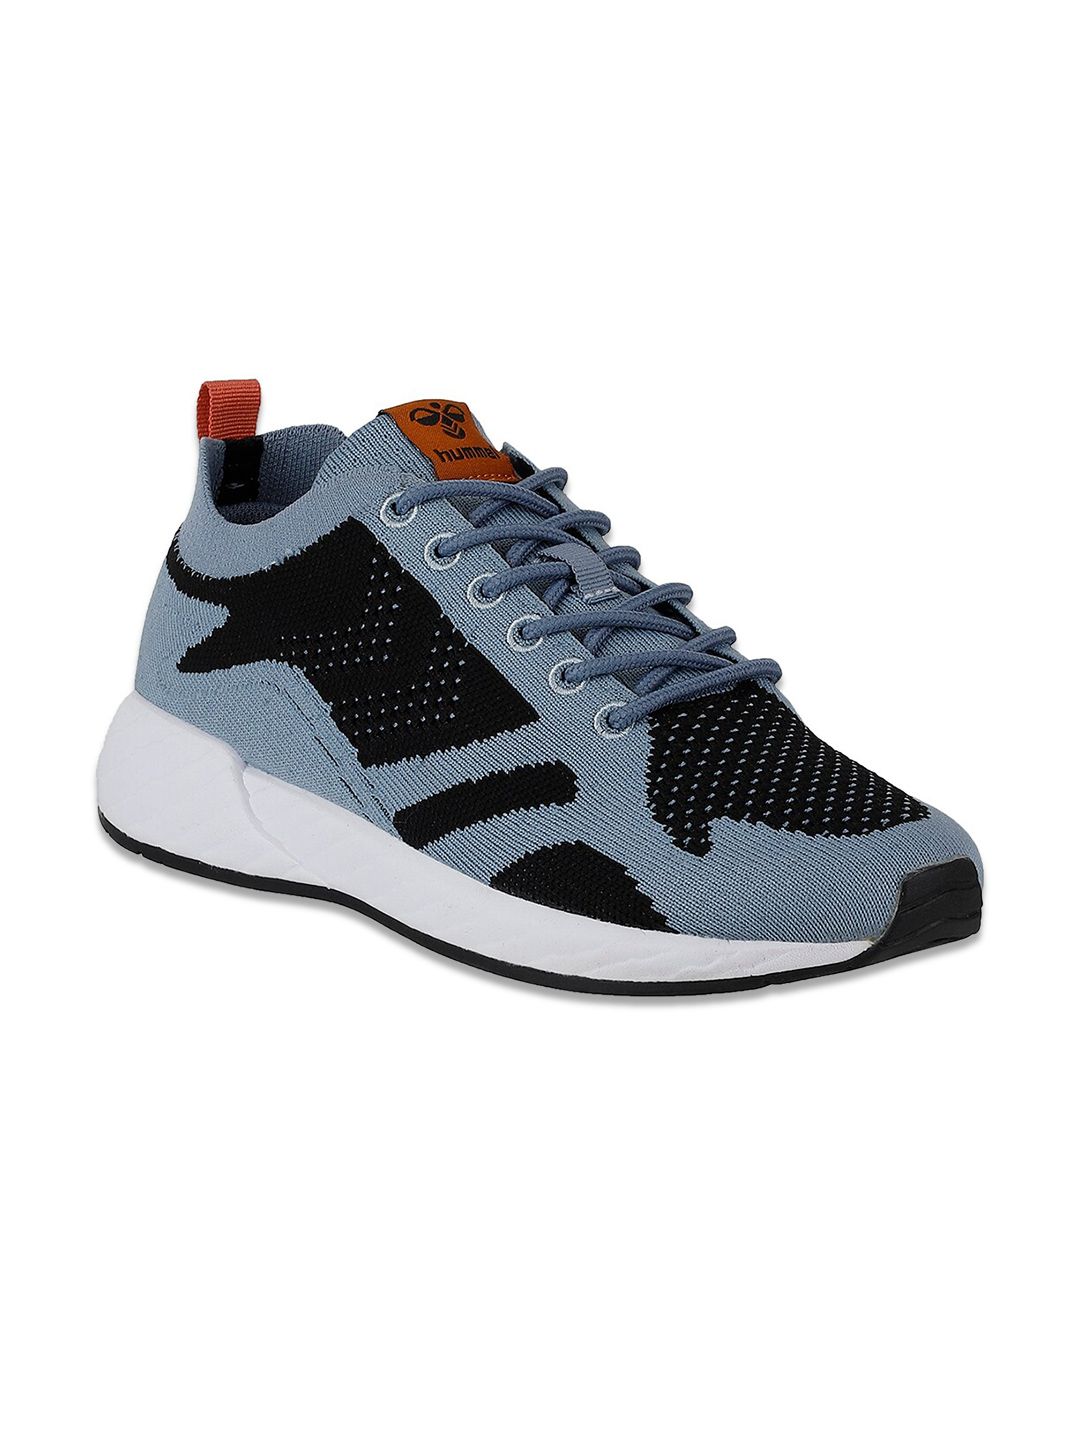 hummel Unisex Blue Textile Training or Gym Shoes Price in India